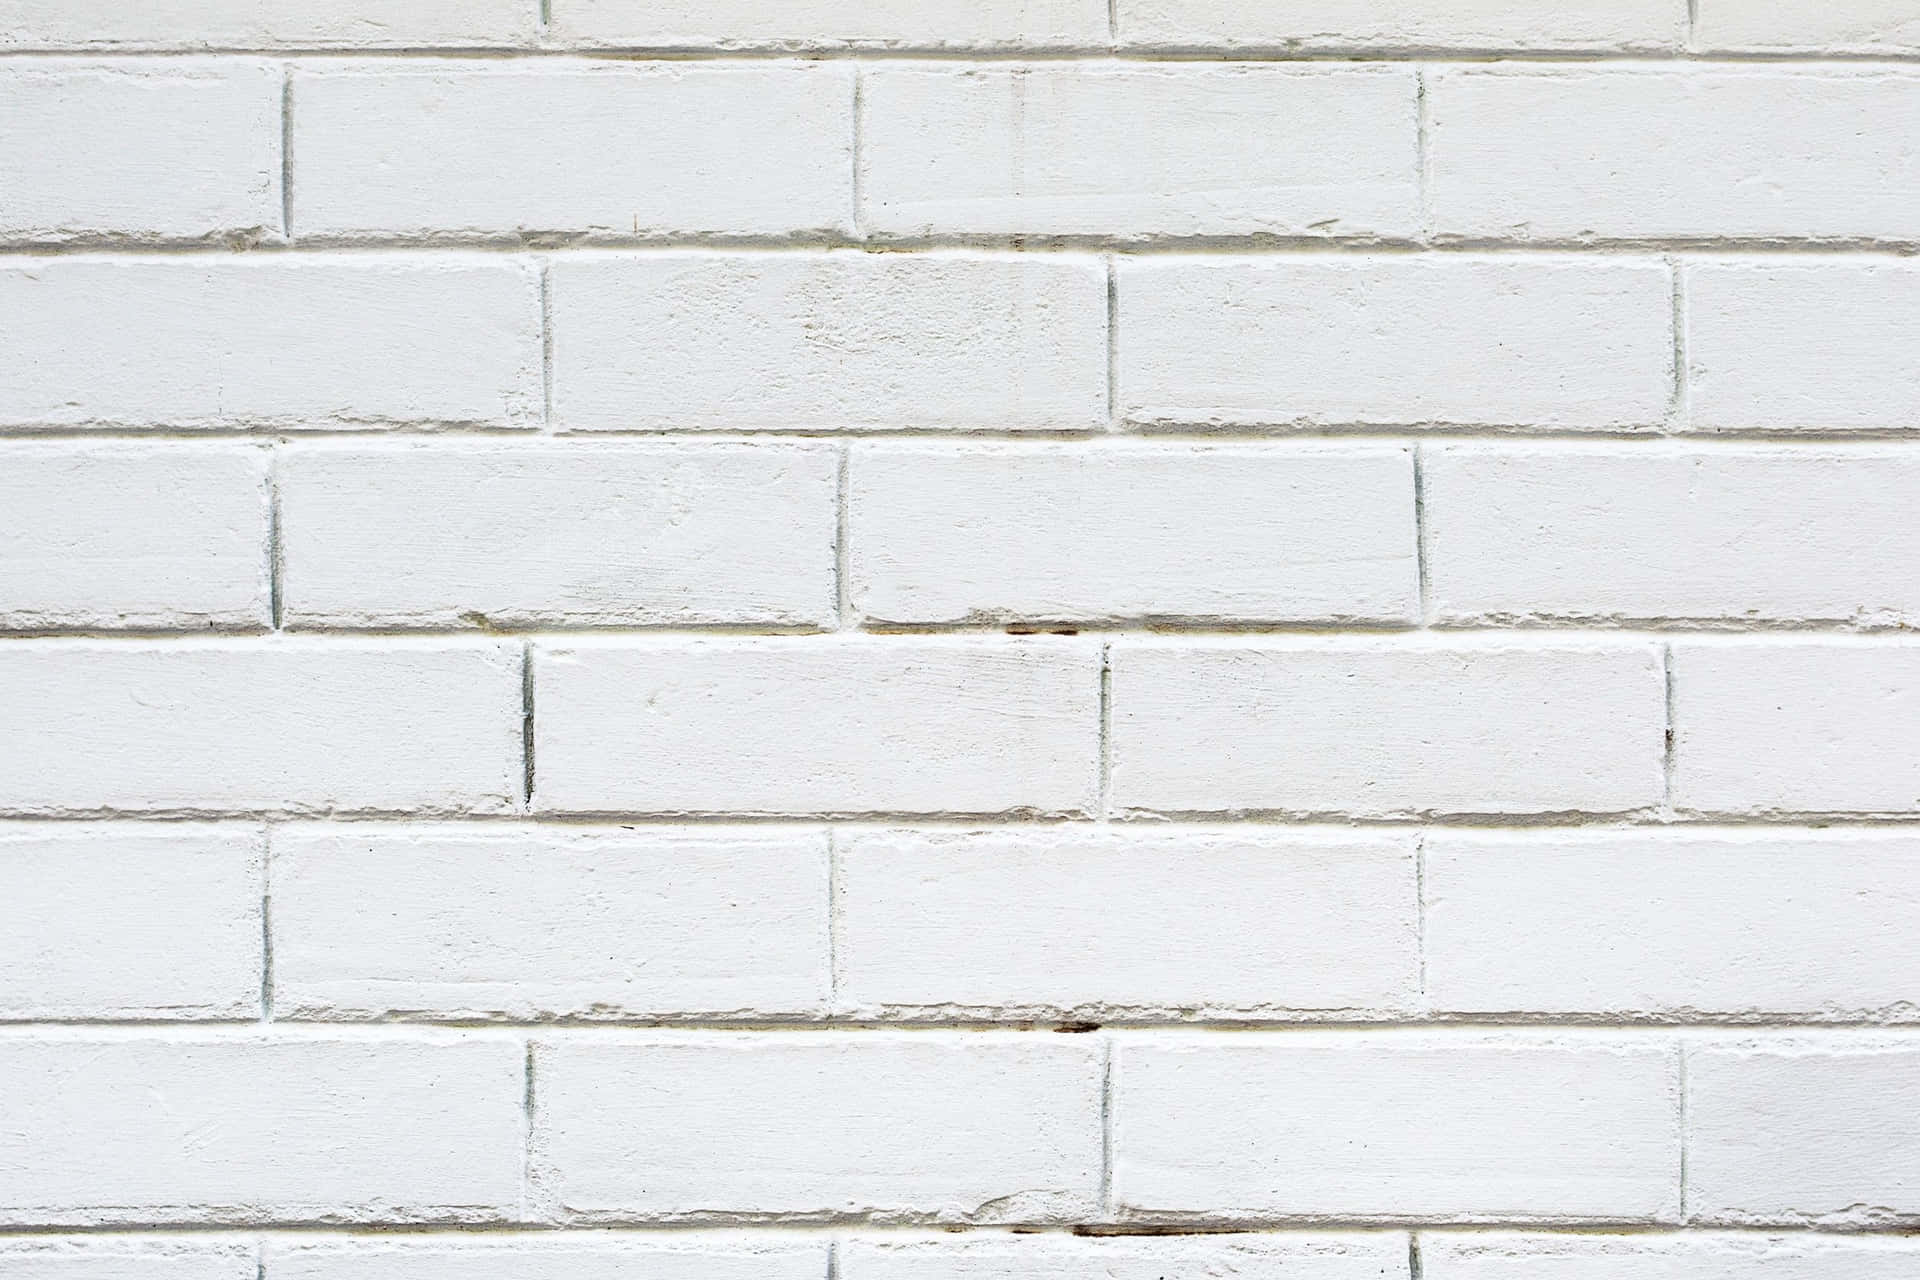 Contrasting against its dark surroundings, a textured white brick wall stands out.